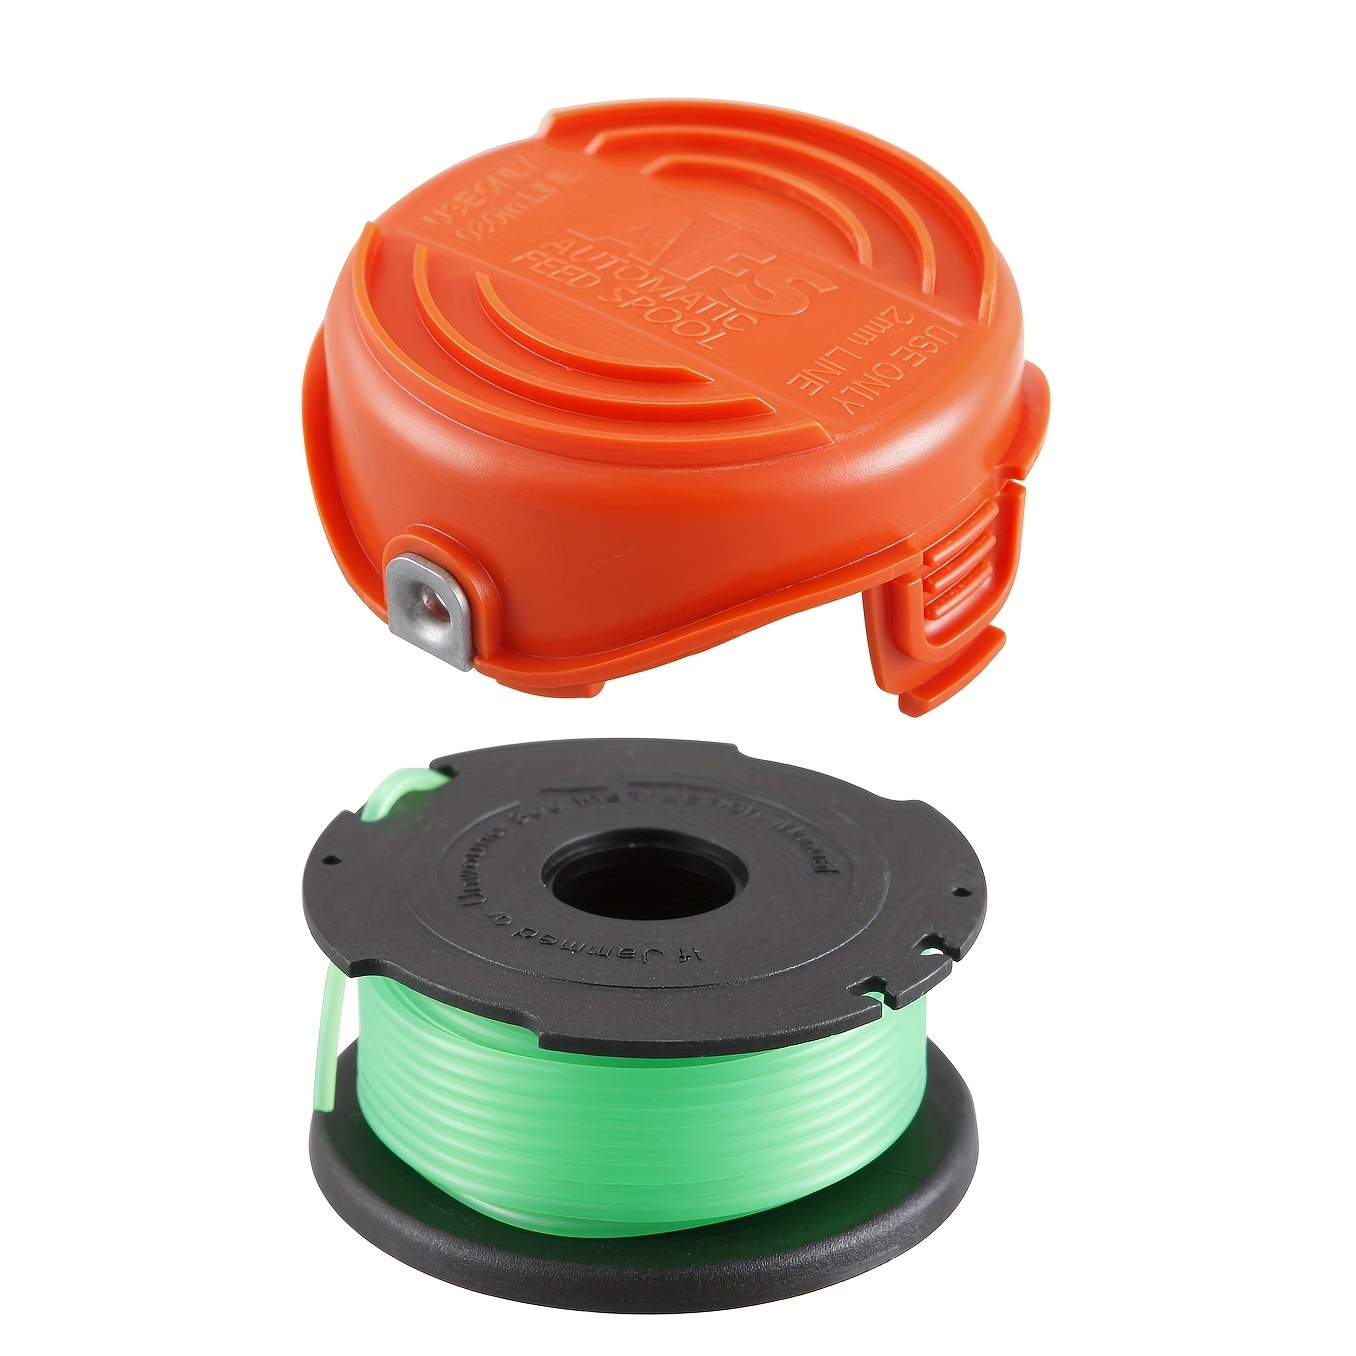 SF-080 Replacement Spool for Black and Decker Weed Eater Spool, 20ft 0.080  String Trimmer Line for Black and Decker Weed Eater String GH3000 GH3000R